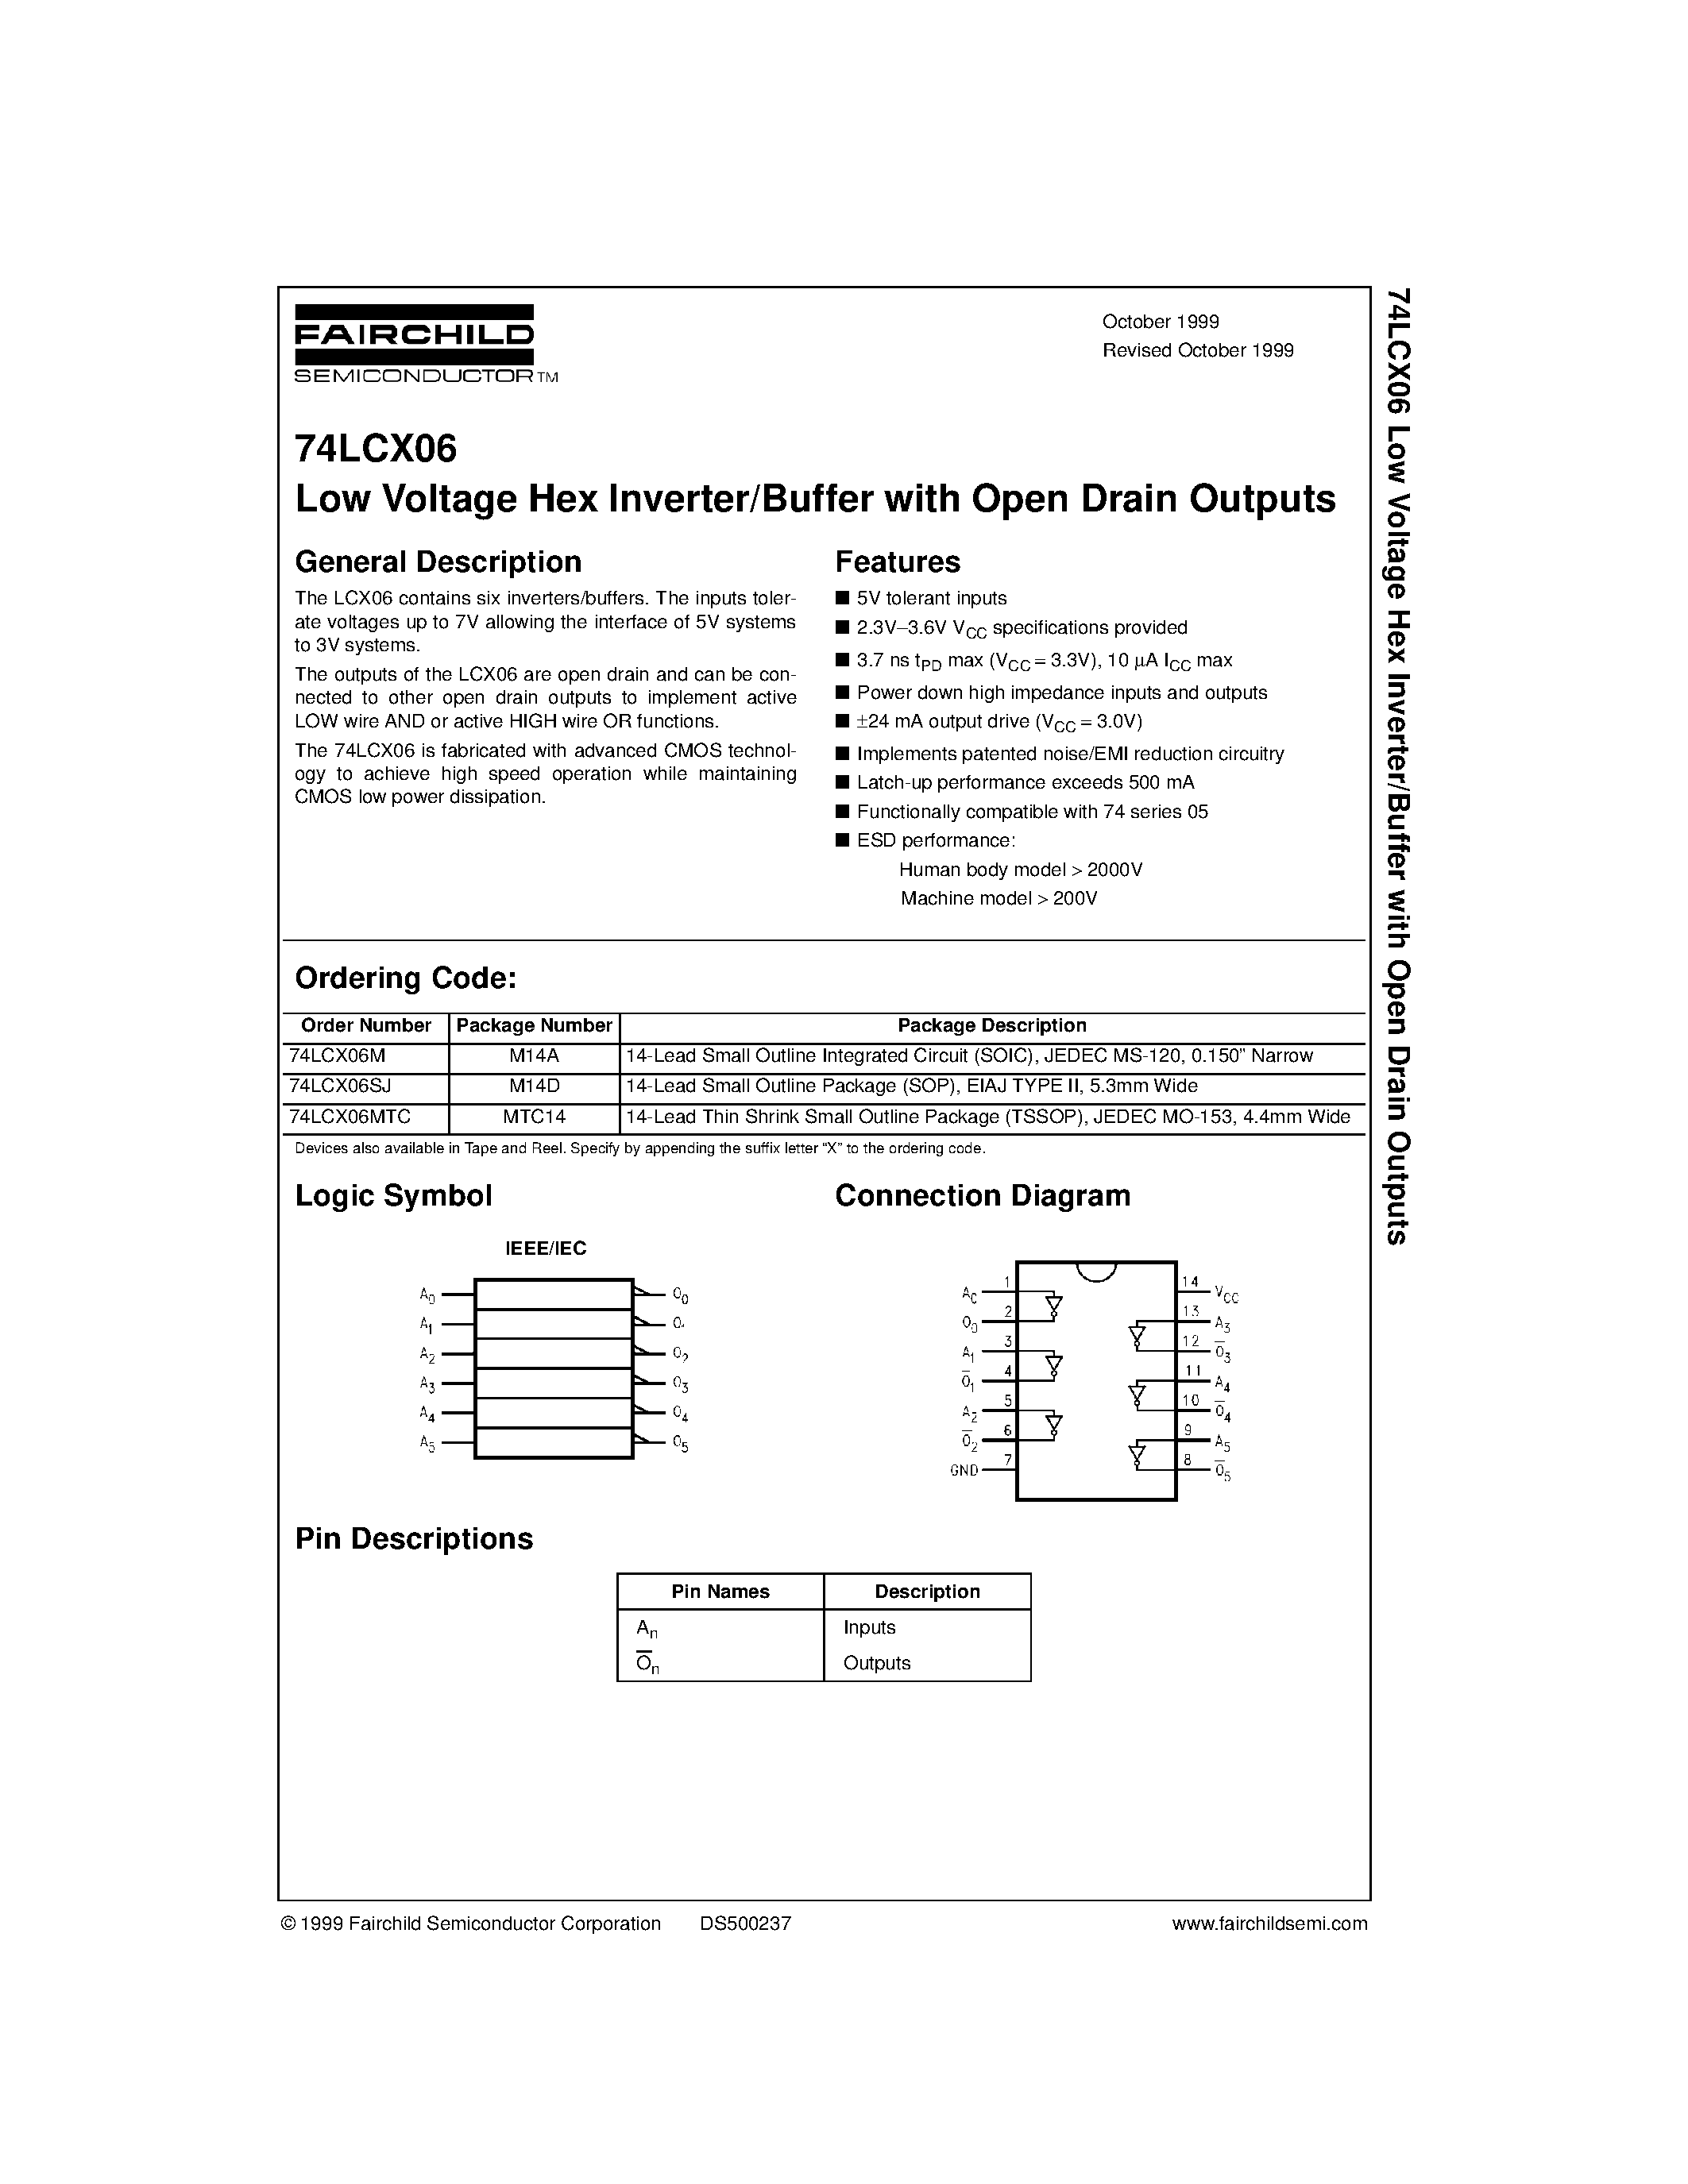 Datasheet 74LCX06MTC - Low Voltage Hex Inverter/Buffer with Open Drain Outputs page 1